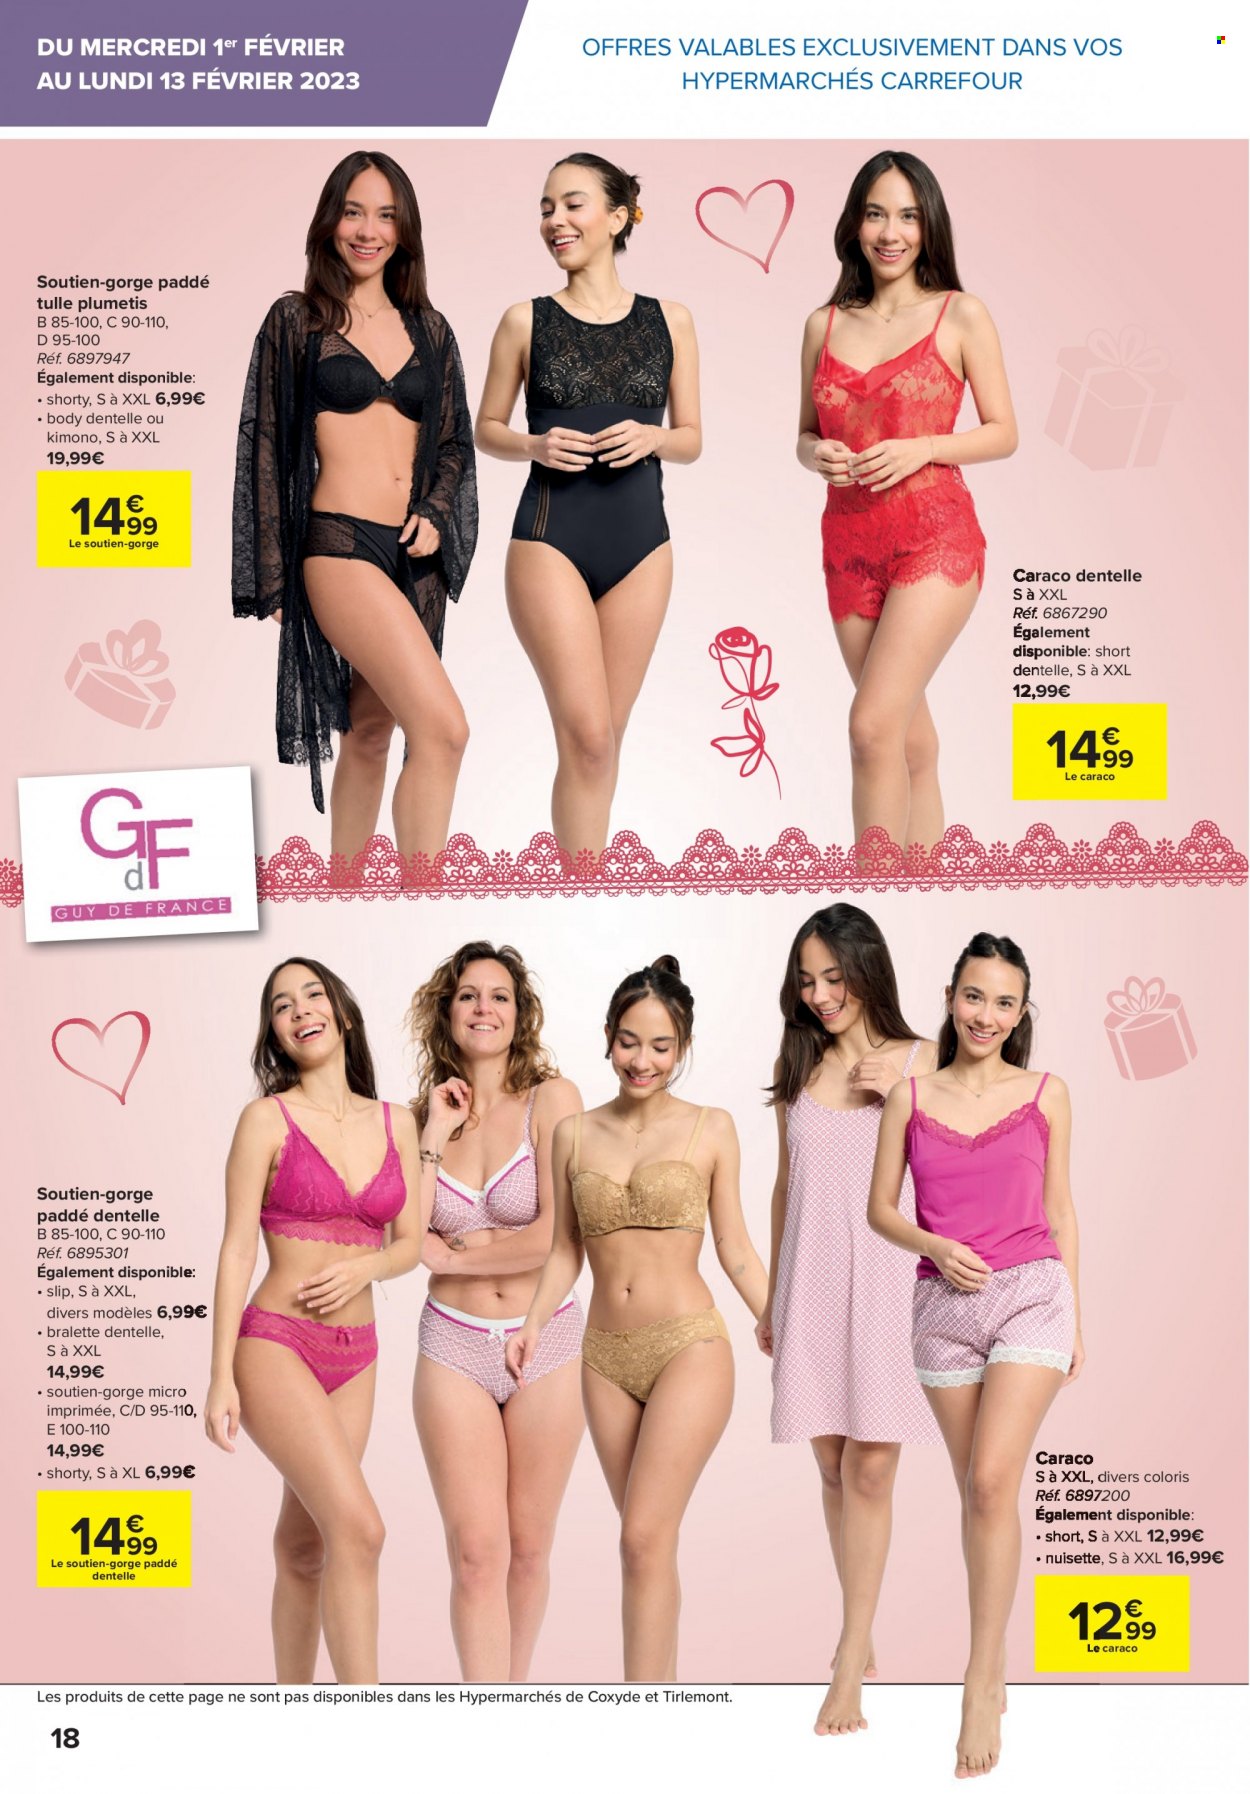 Catalogue Carrefour hypermarkt - 1.2.2023 - 13.2.2023. Page 18.